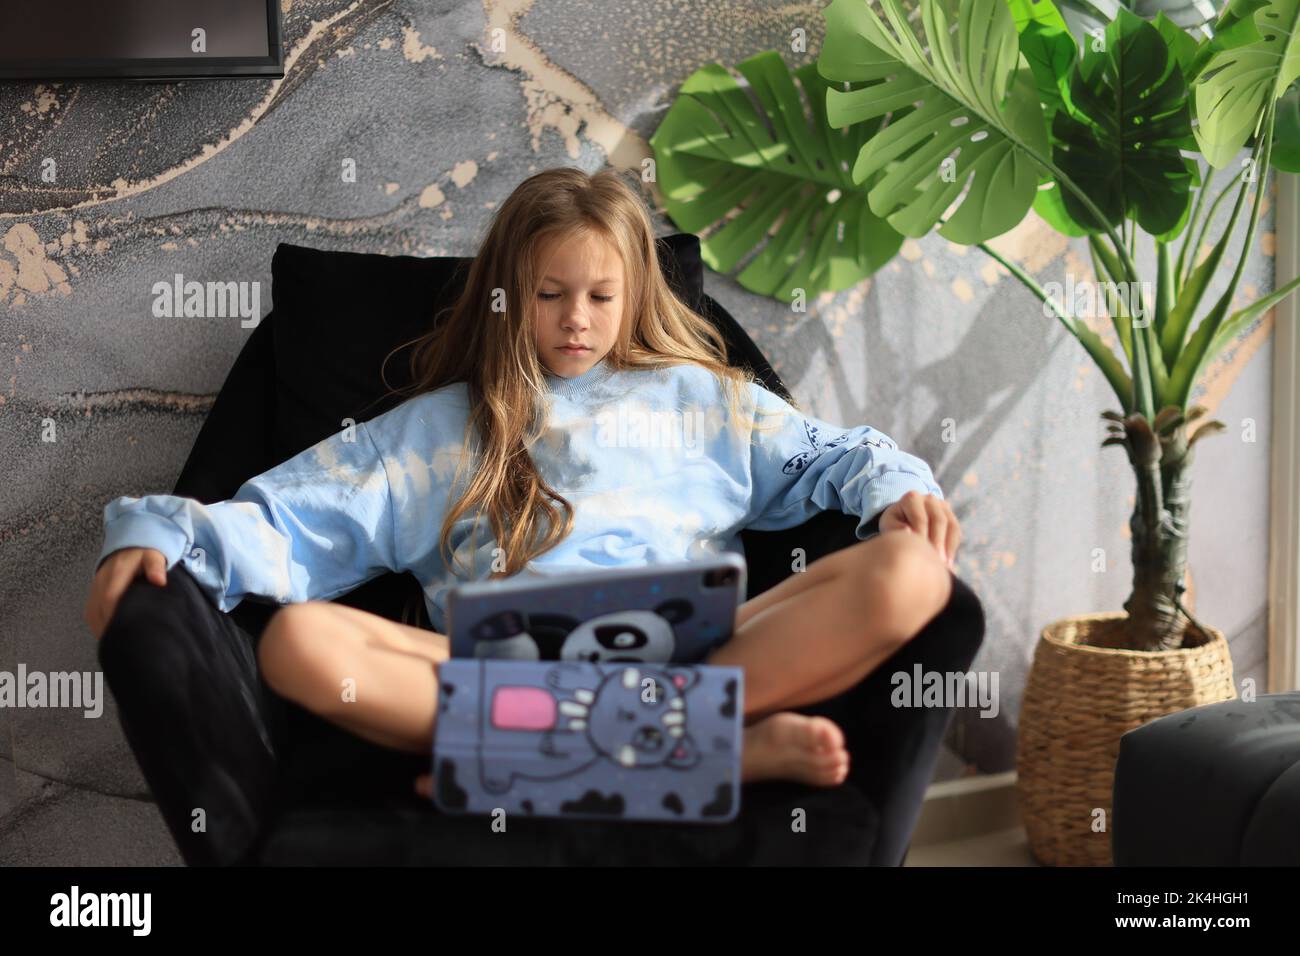 Curious cute kid girl using digital tablet technology device sitting on sofa alone Stock Photo